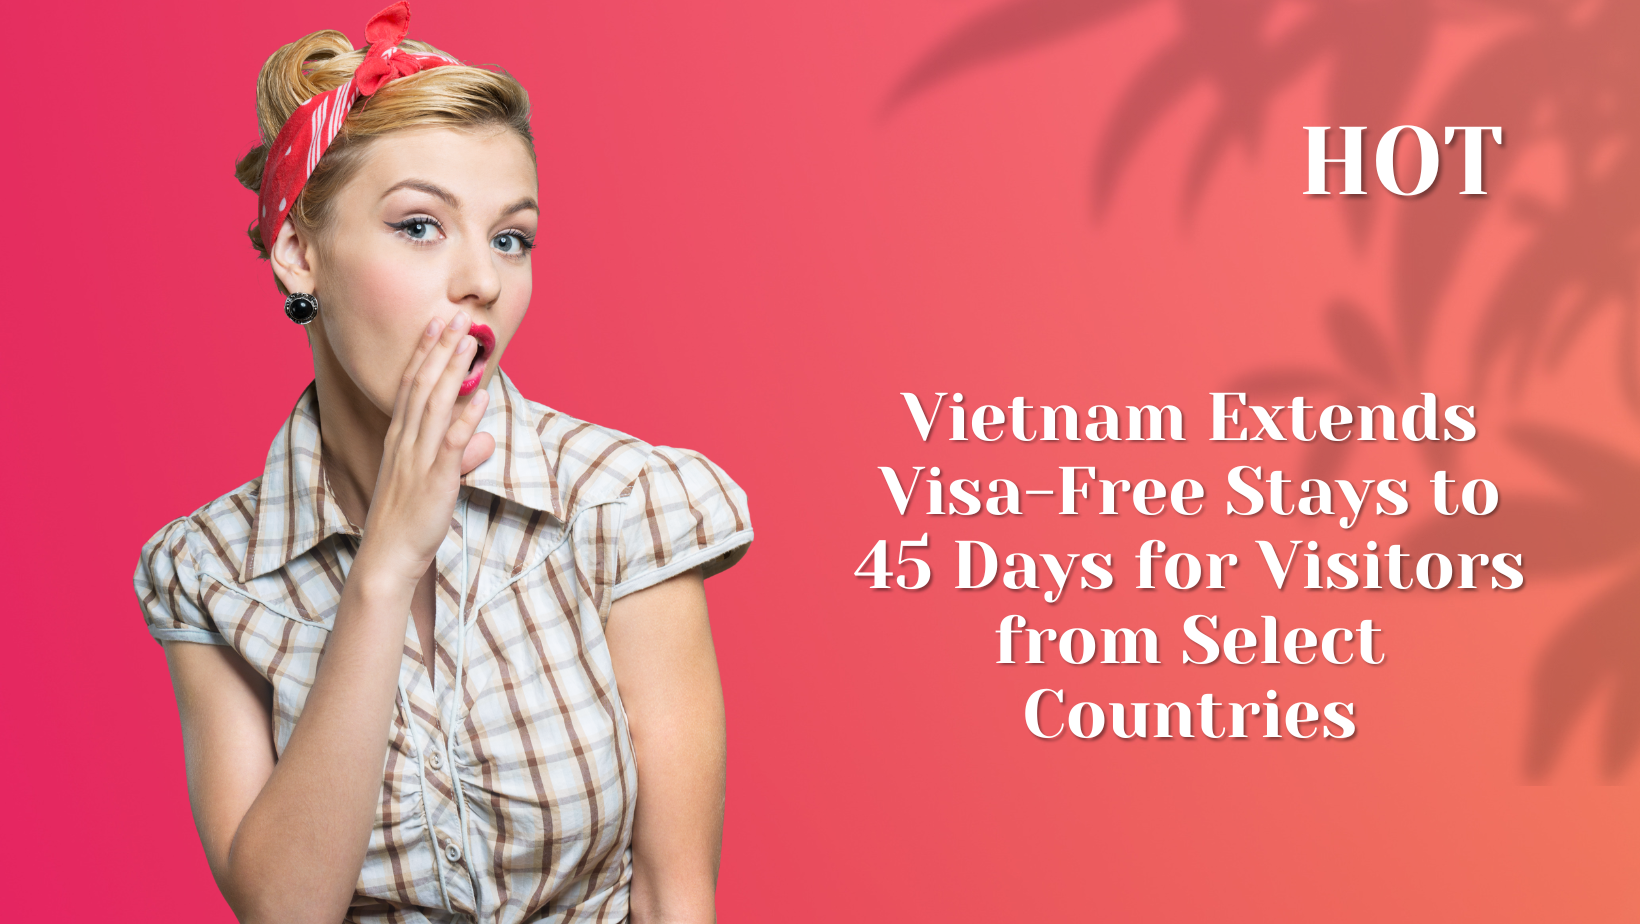 Vietnam Extends Visa-Free Stays to 45 Days for Visitors from Select Countries